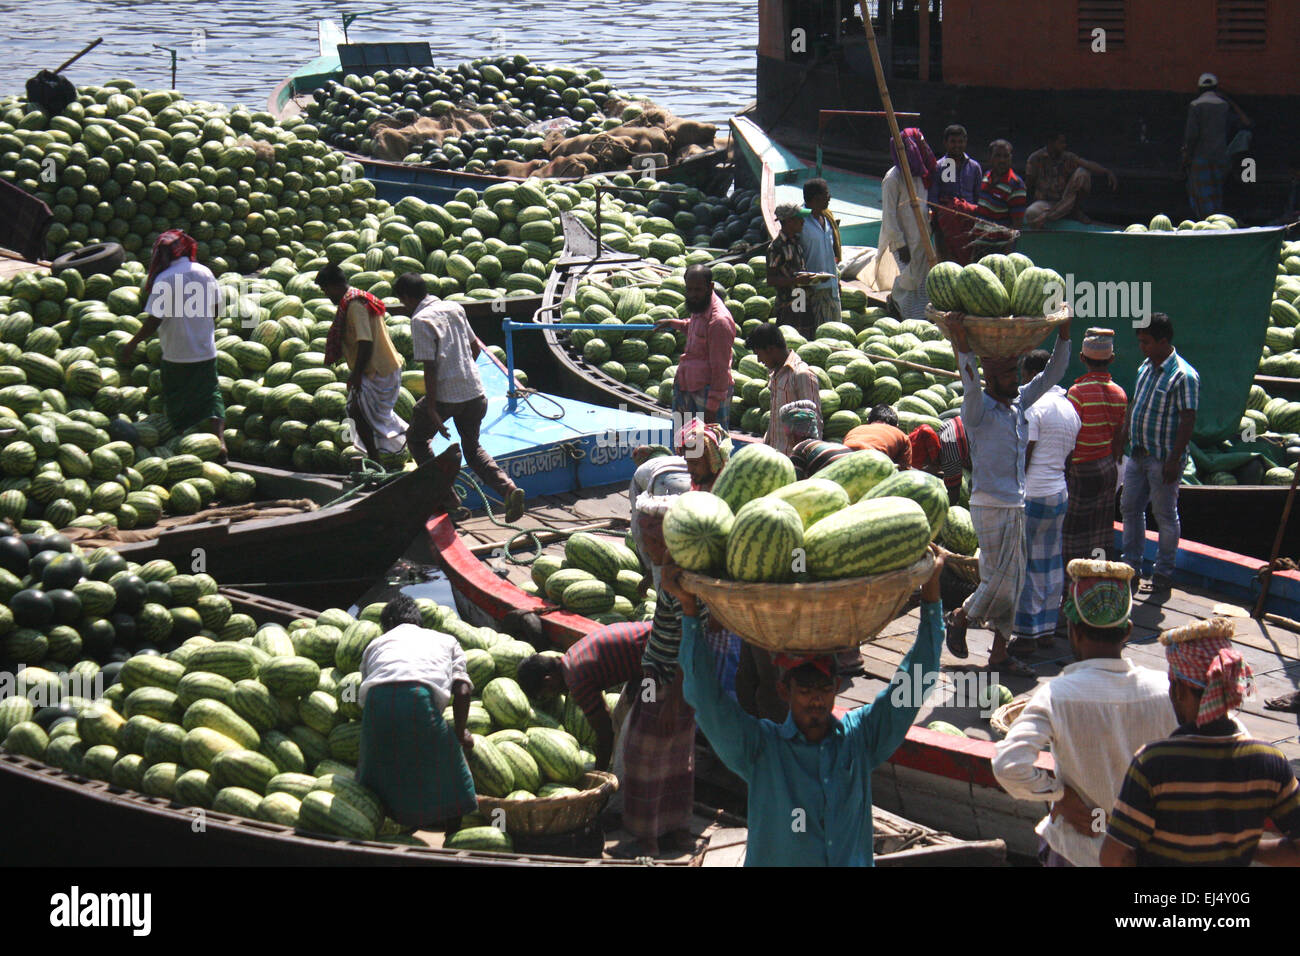 Workers unload watermelons from the boats at Sadarghat for selling in Dhaka, Bangladesh. March 21, 2015 Bumper production of watermelon in Bangladesh this season. Experts have said that the good quality watermelons were a bumper harvest this year owing to favoring weather and improved farming in Bangladesh. Stock Photo